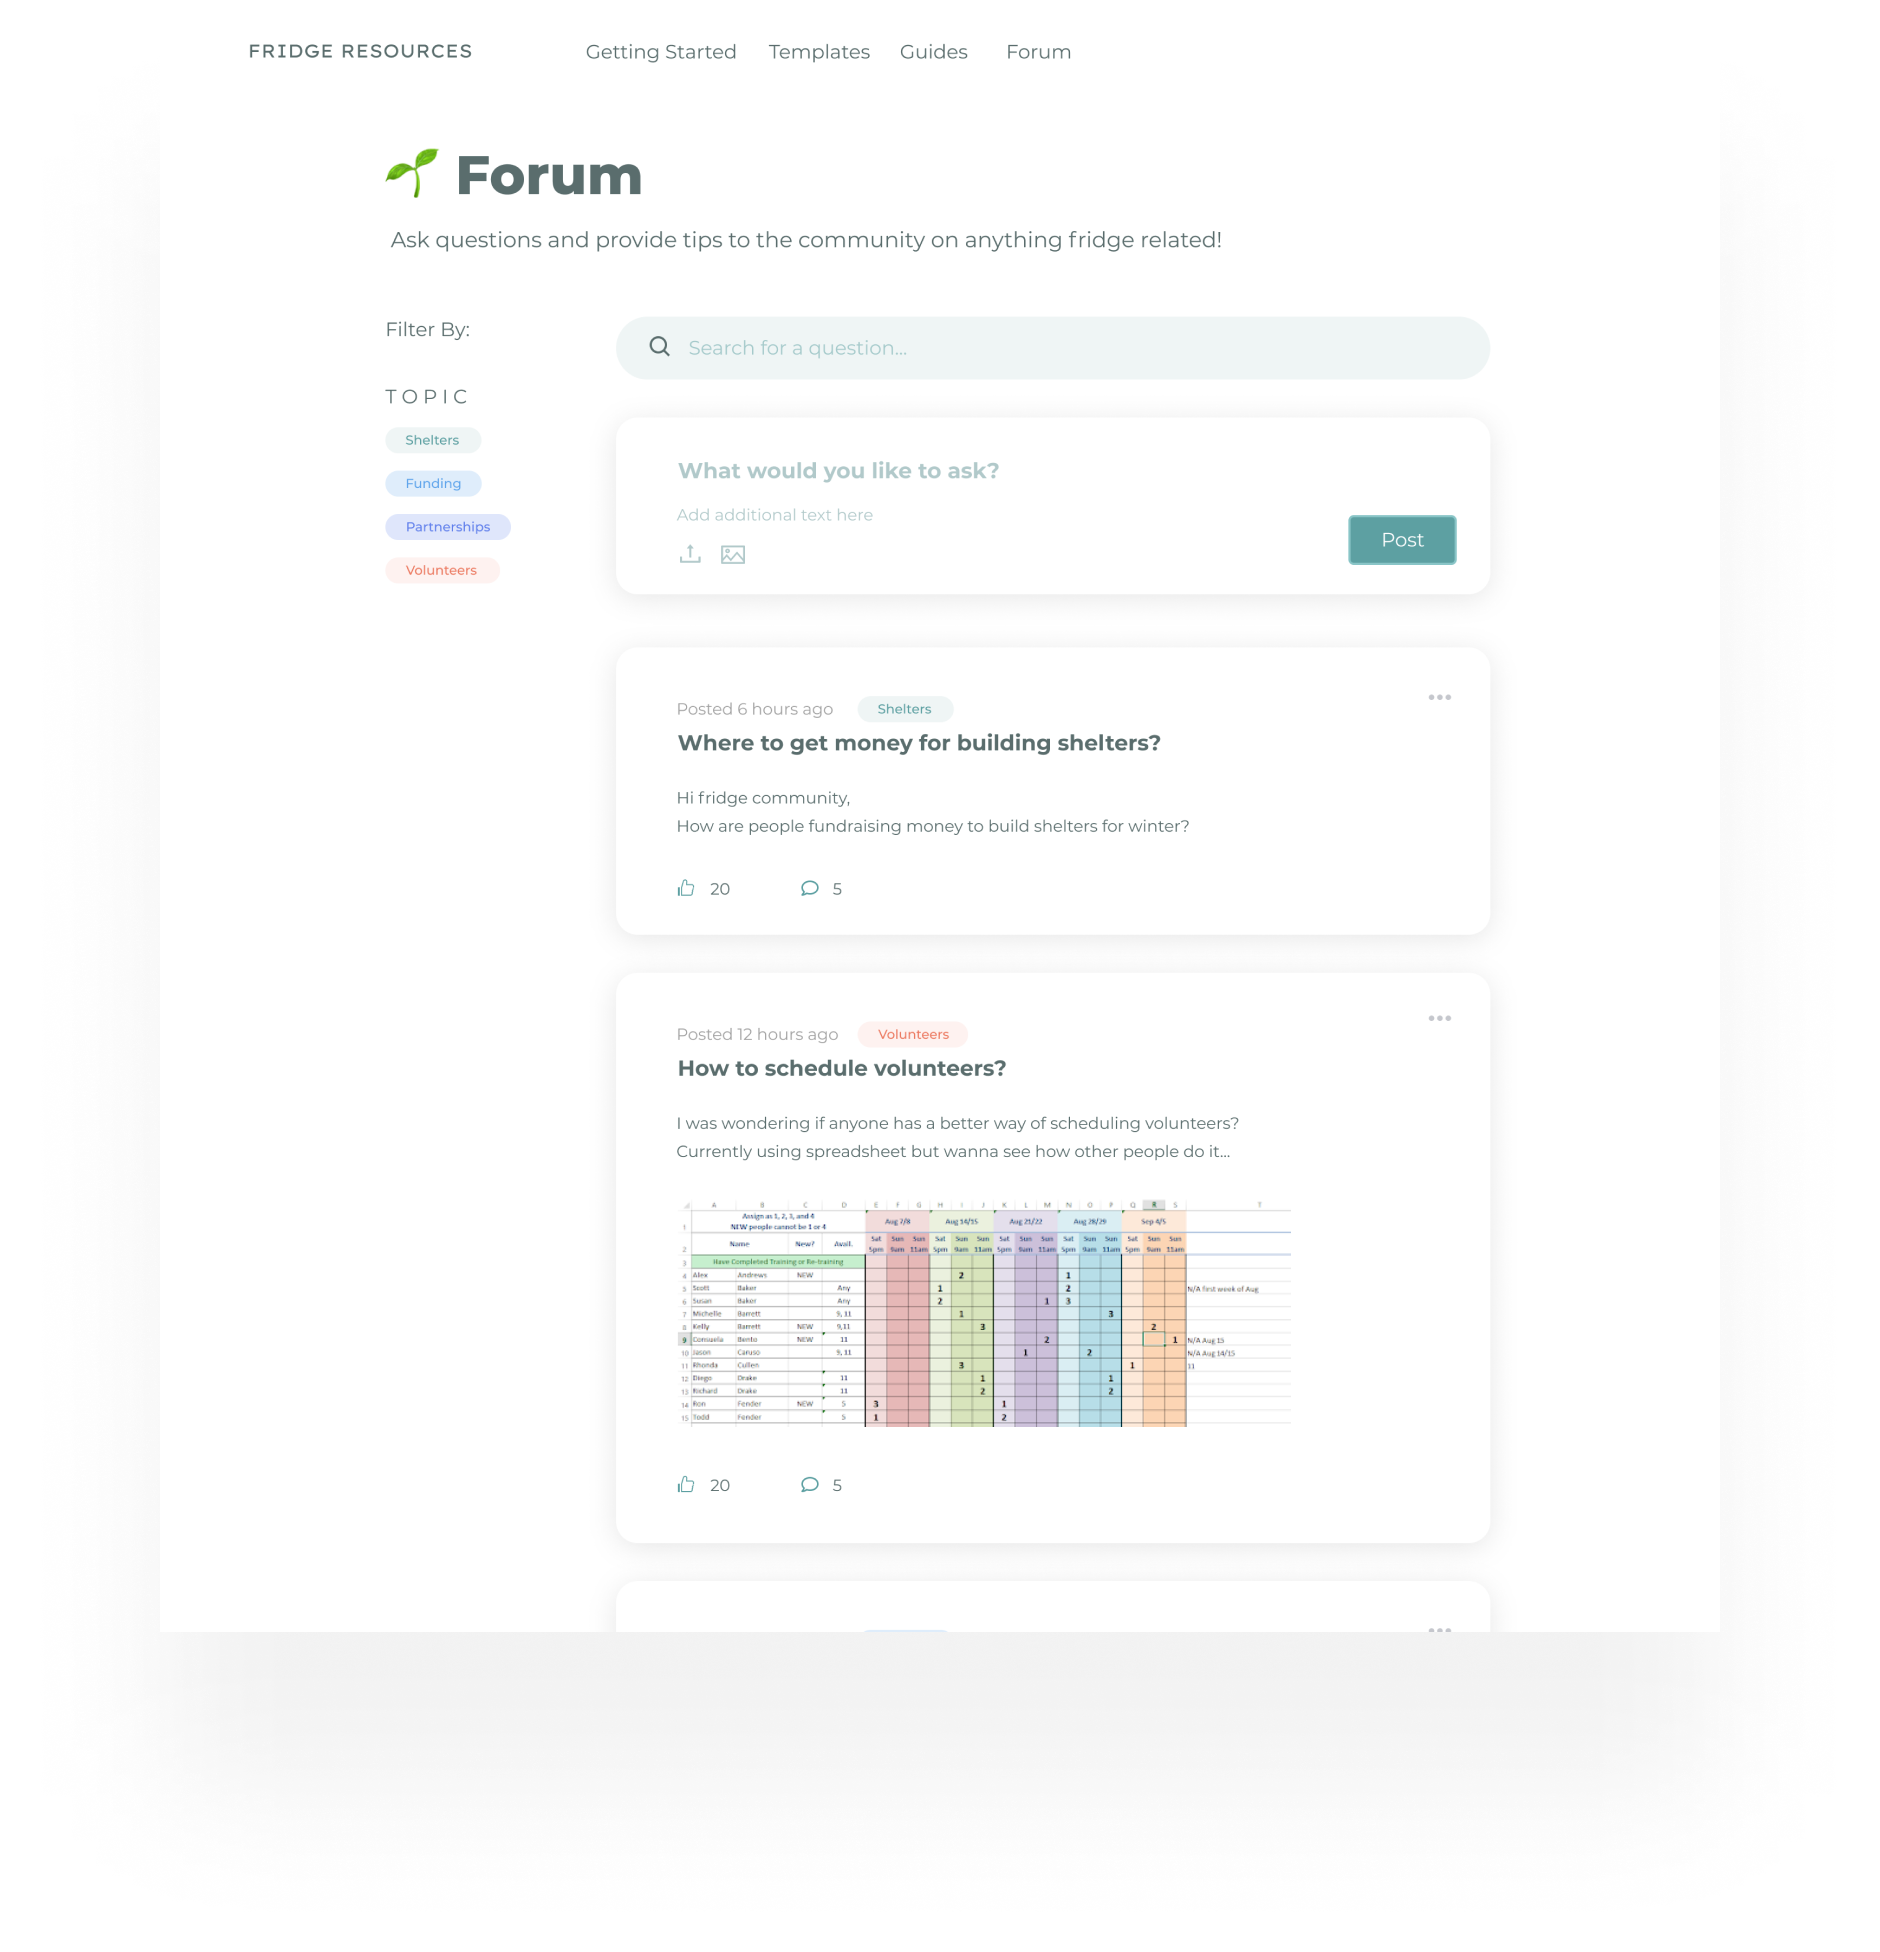 Image: Screenshot of forum page from figma prototype